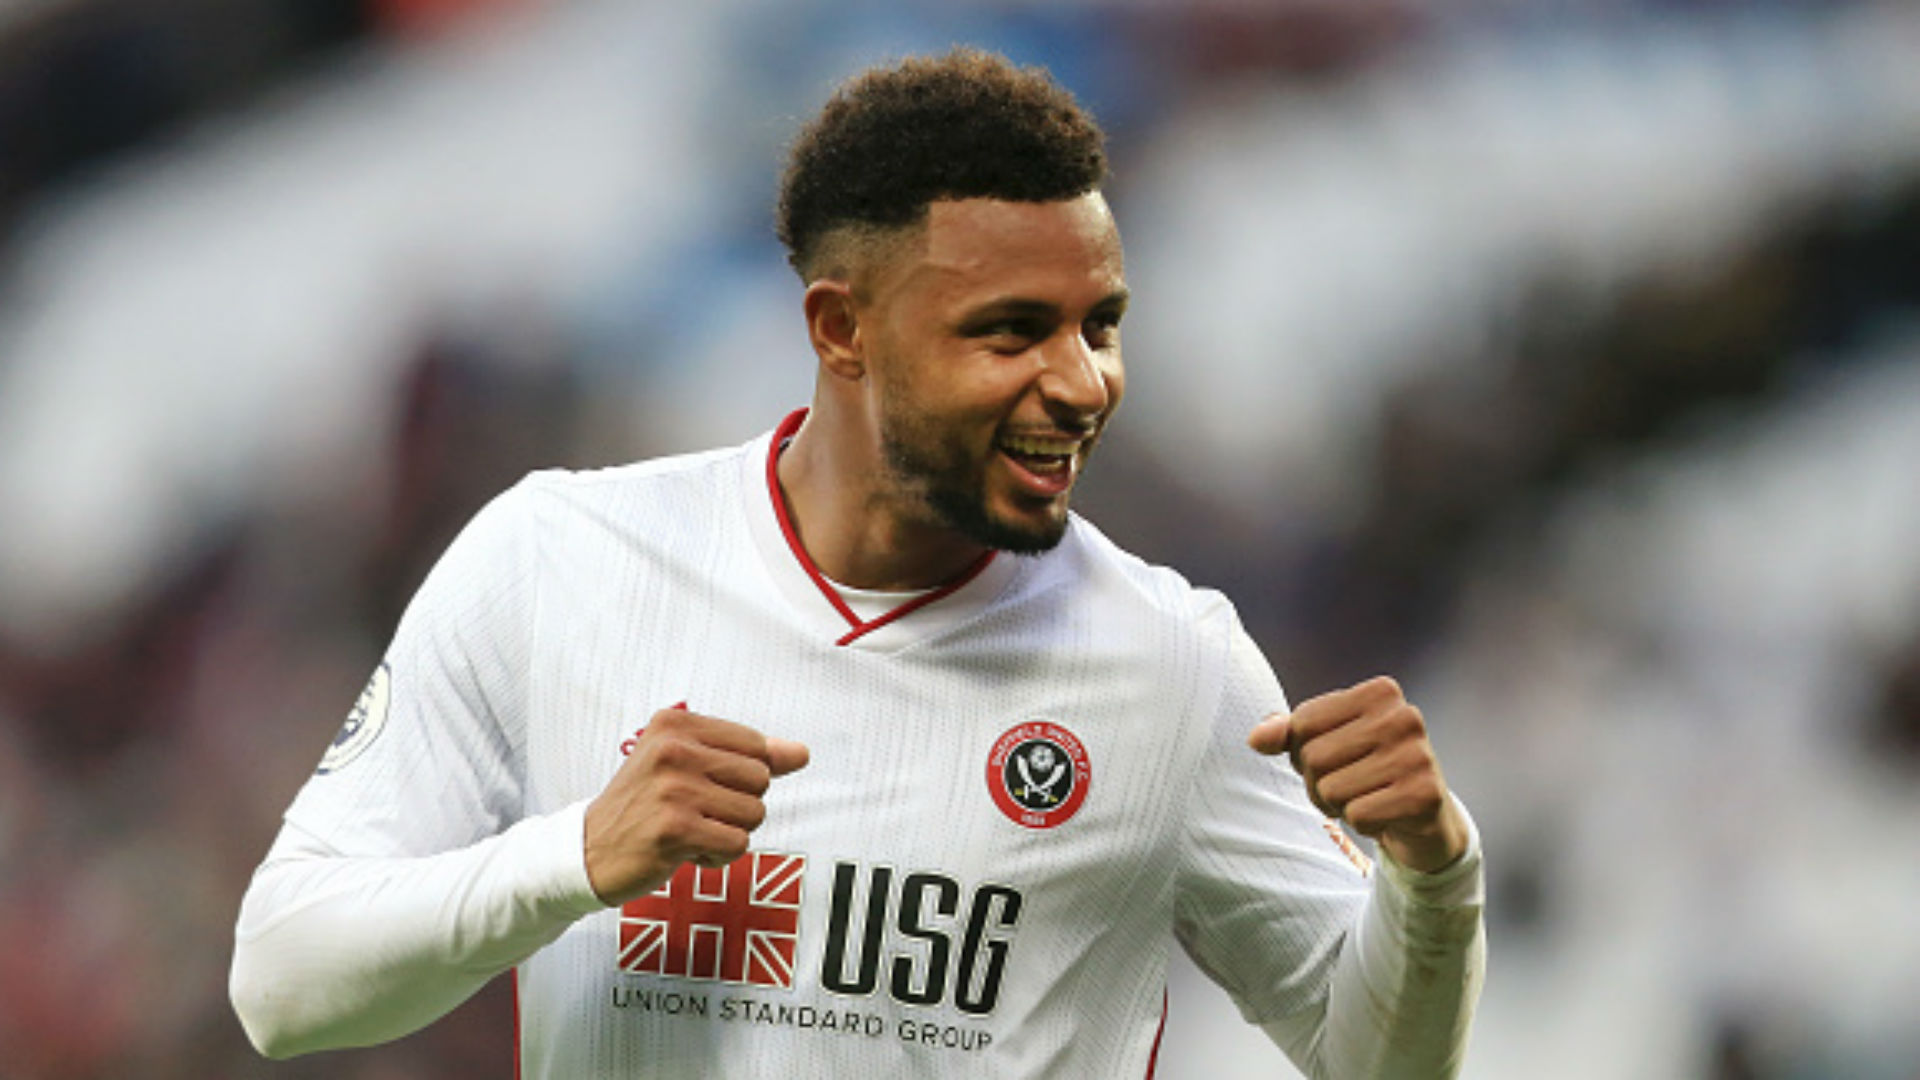 ‘If Senegal called me, I would say yes' – Sheffield United’s Mousset